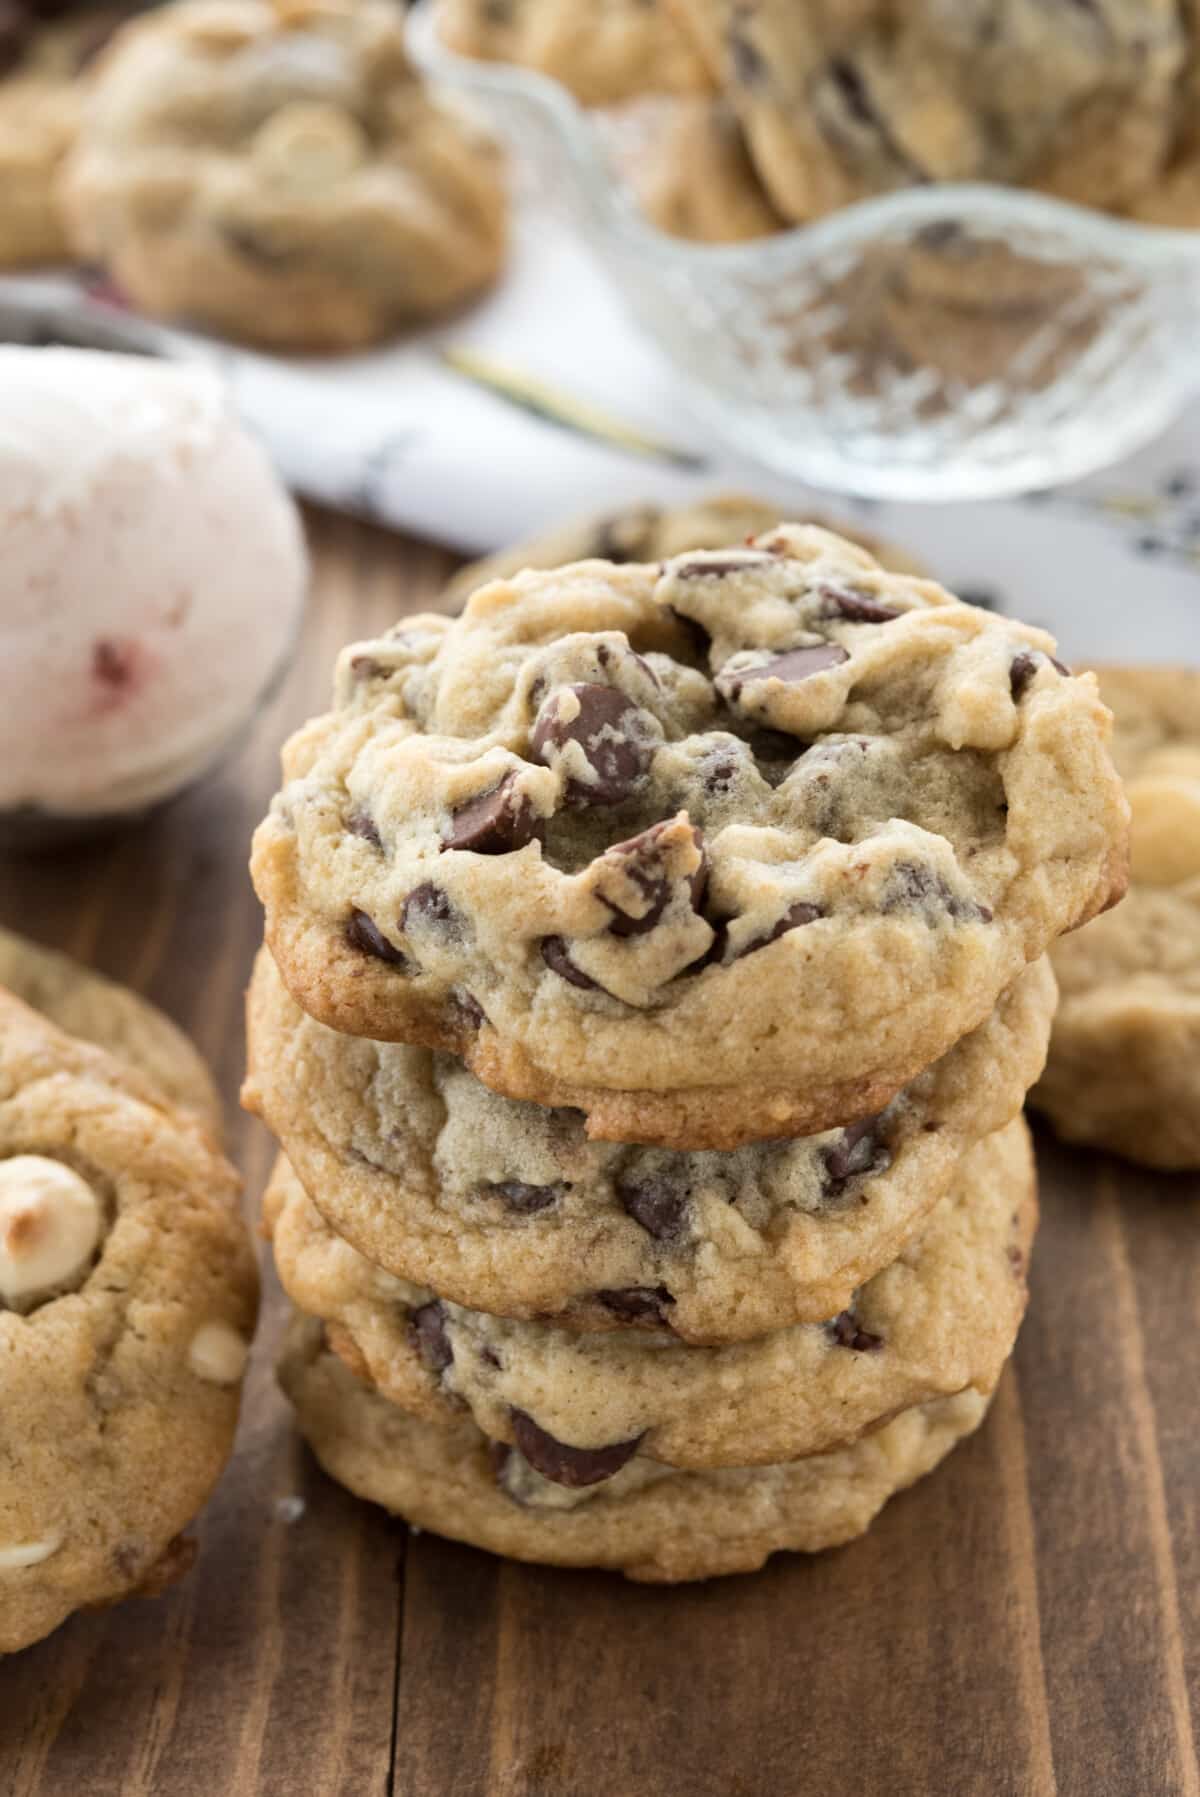 Ice Cream Chocolate Chip Cookies - Crazy for Crust